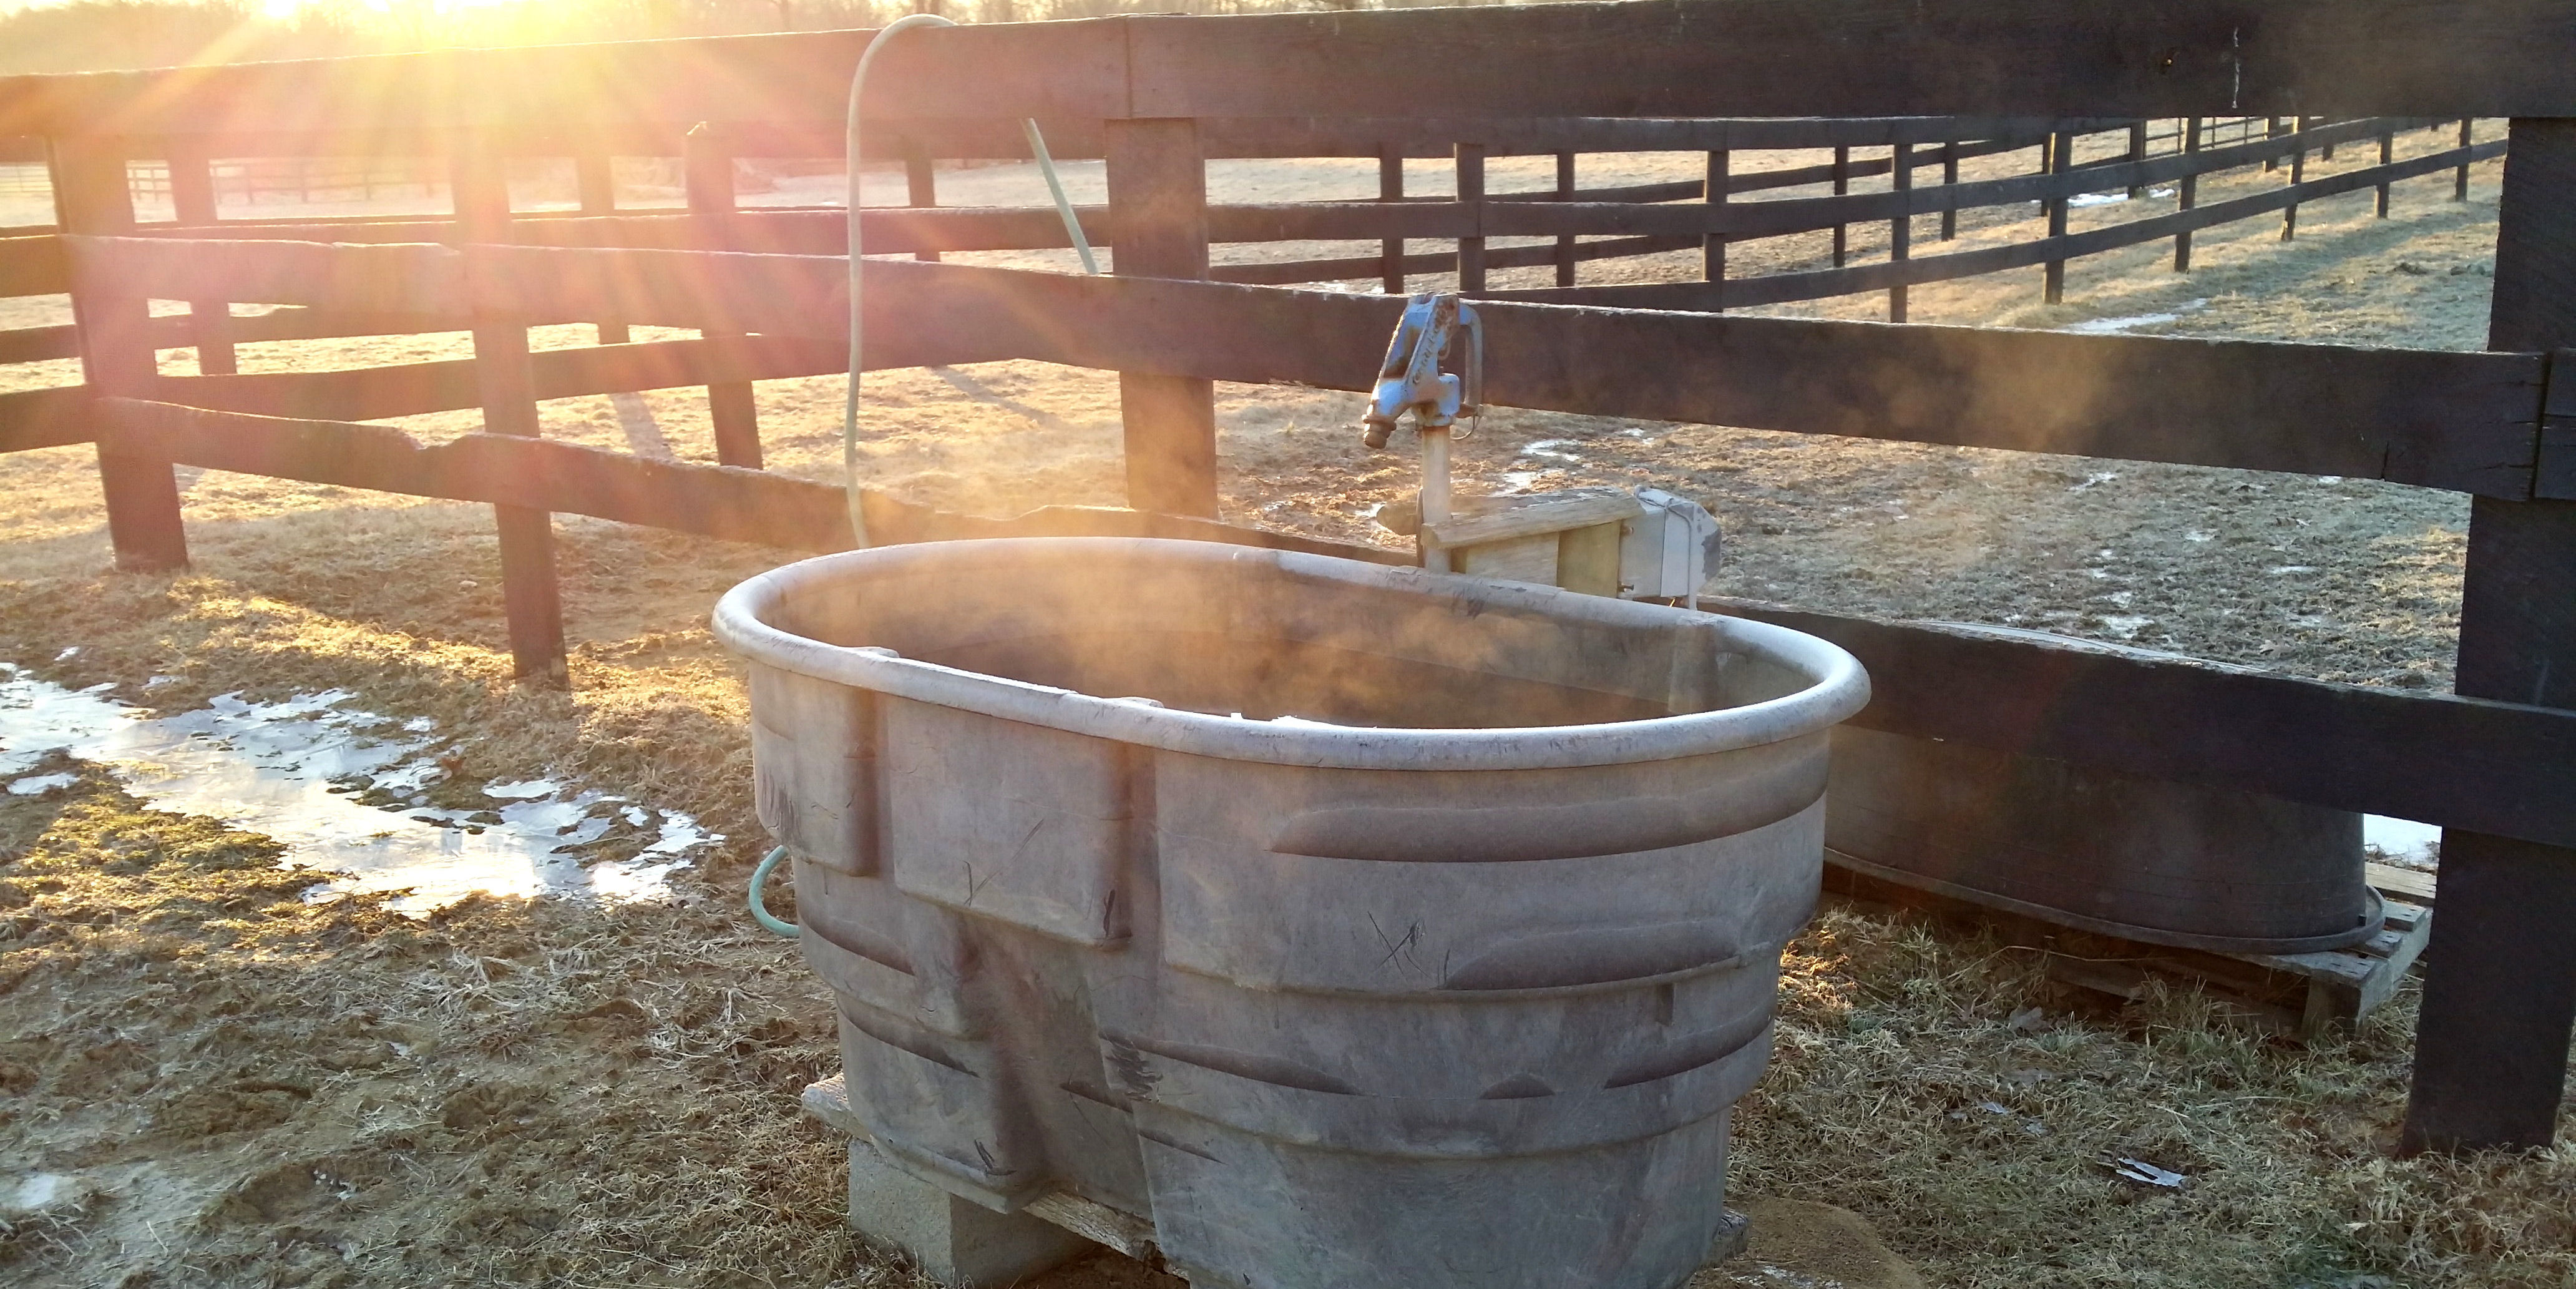 Water trough with properly working tank heater